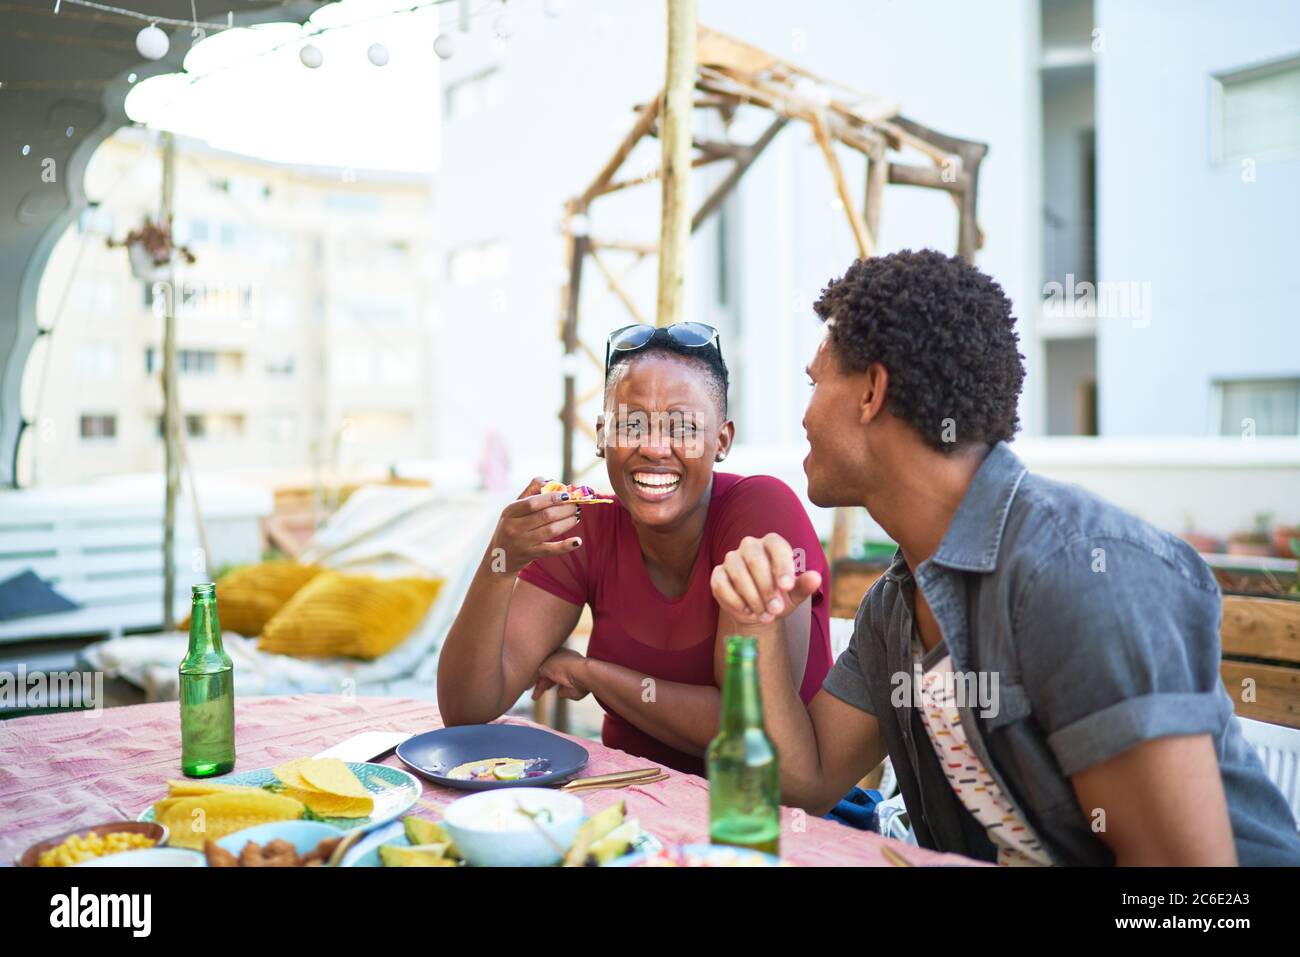 Happy young couple eating lunch at patio table Stock Photo